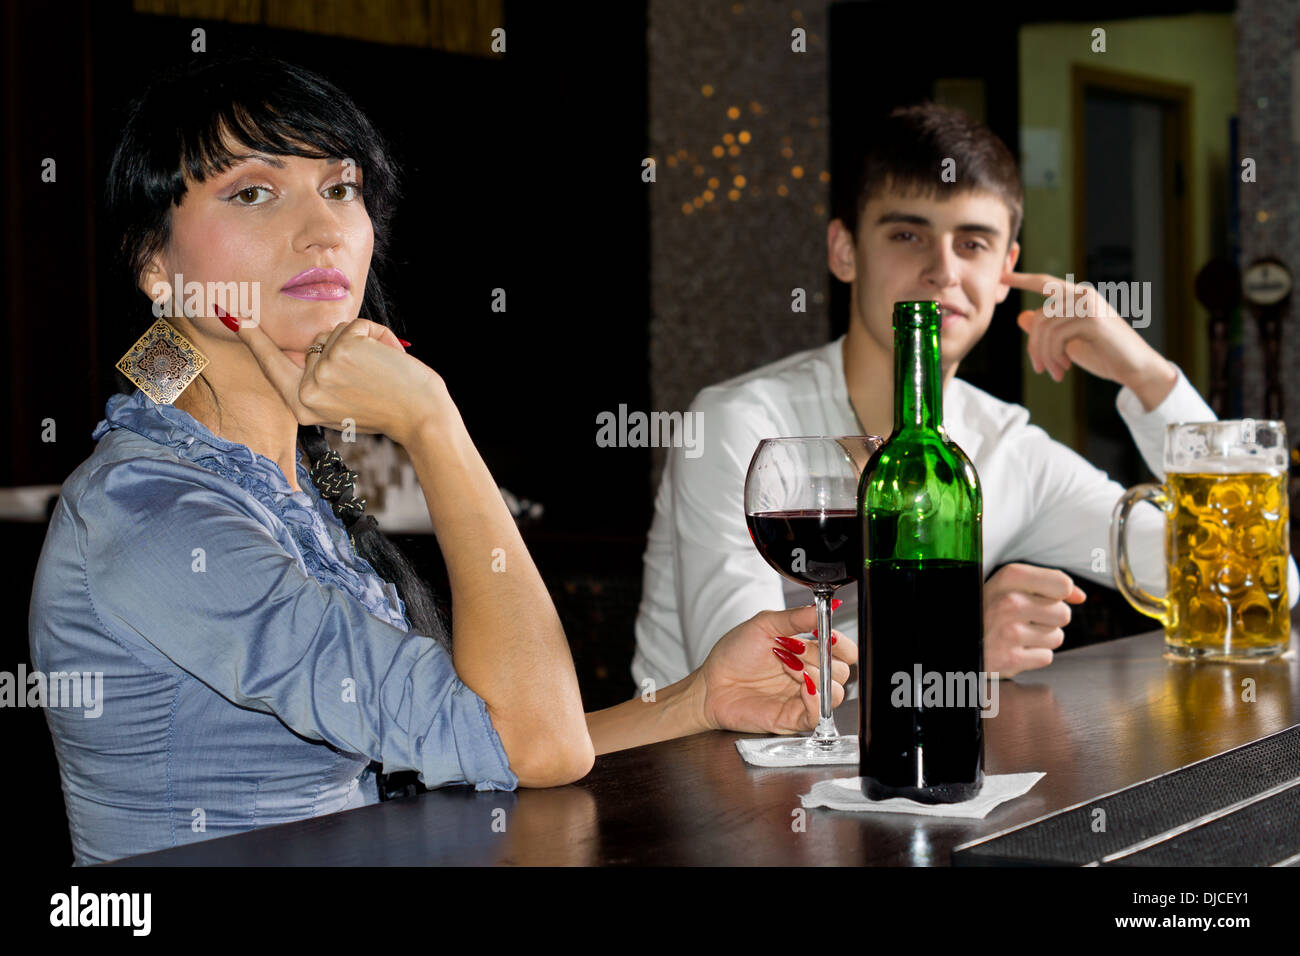 Sophisticated young woman drinking at a bar enjoying a bottle of red wine turning to look at the camera with a man in the background. Stock Photo